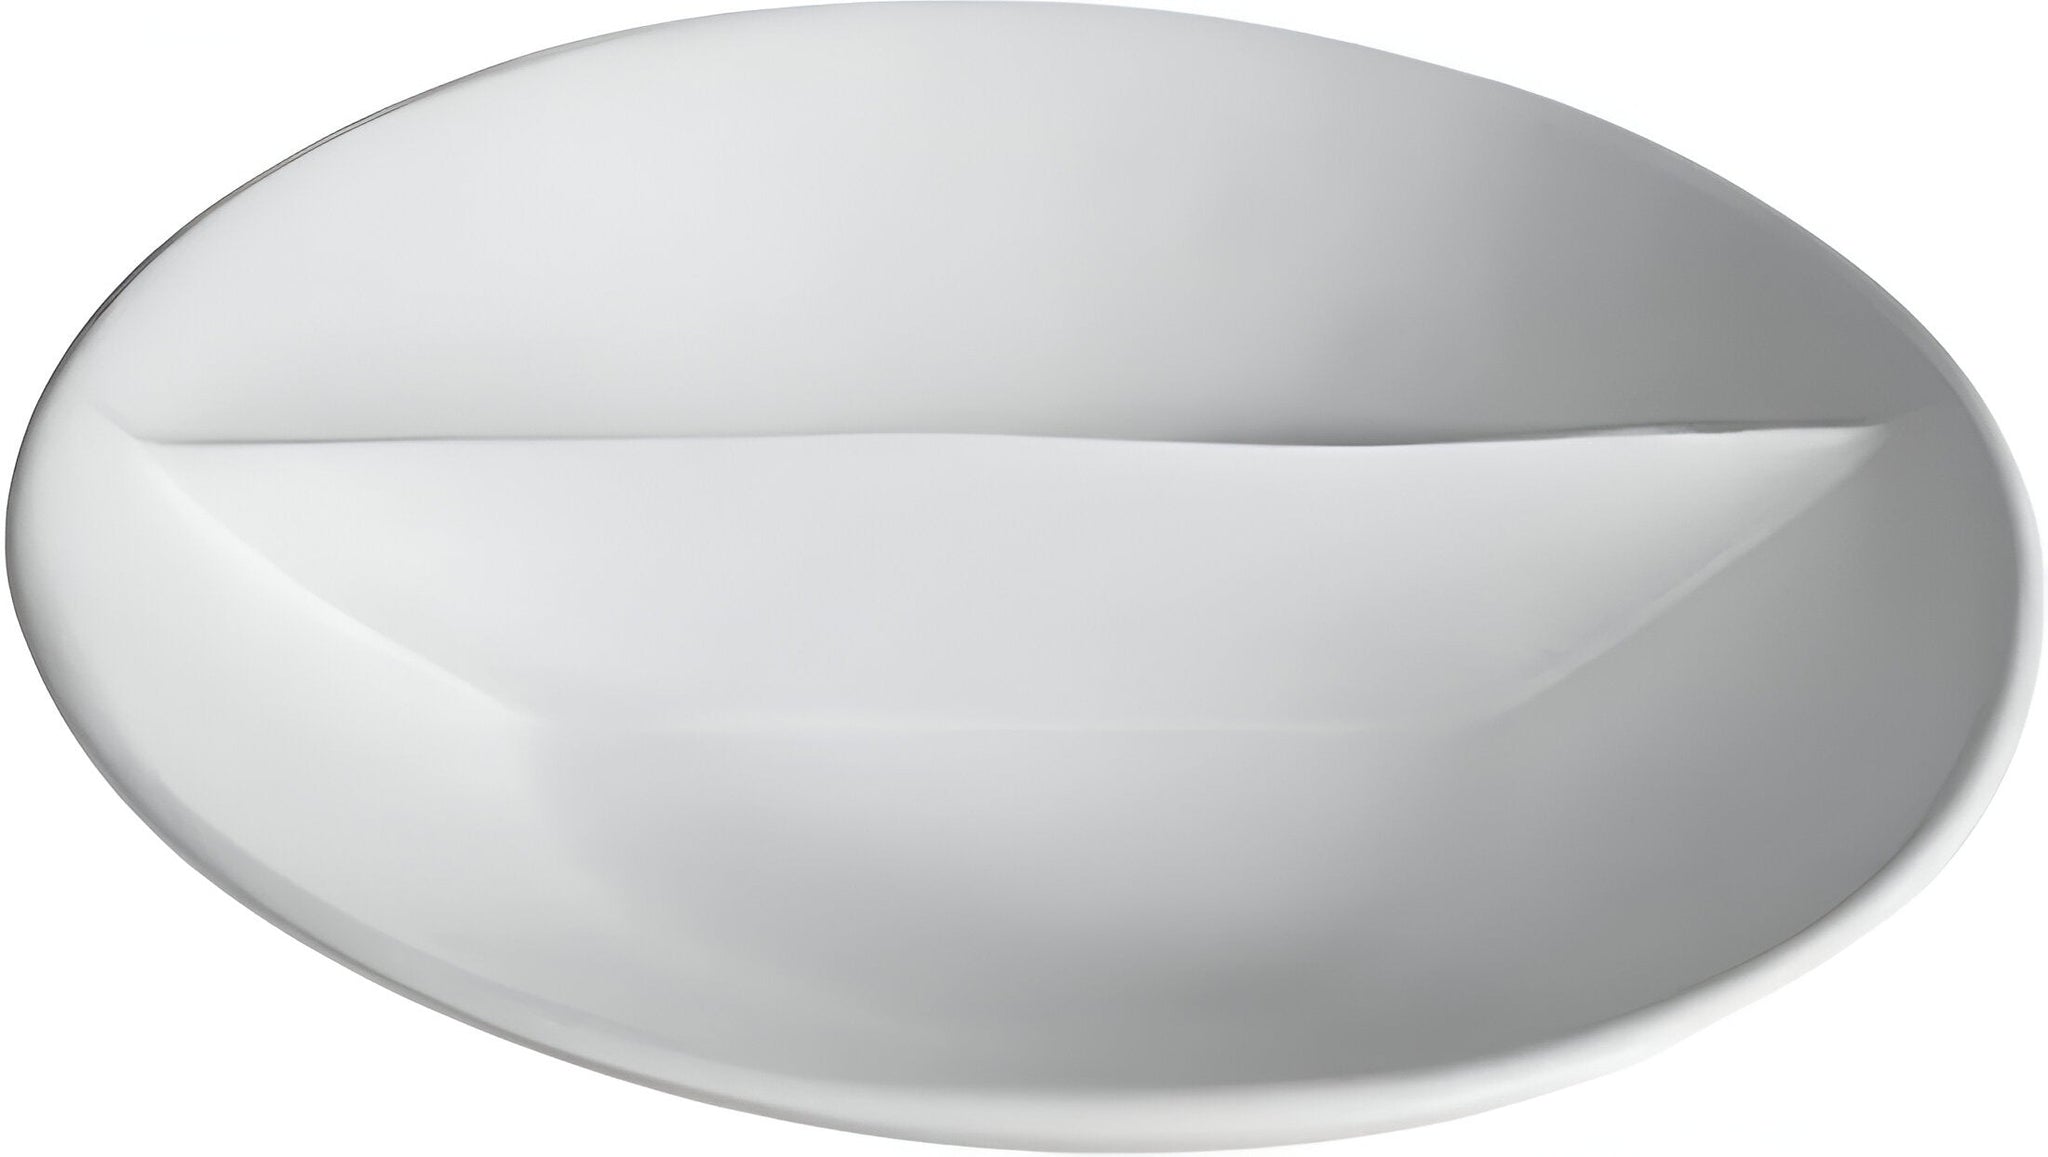 Bugambilia - Classic 3.2 Qt White Round Divided Platter With Elegantly Textured - PR014WW